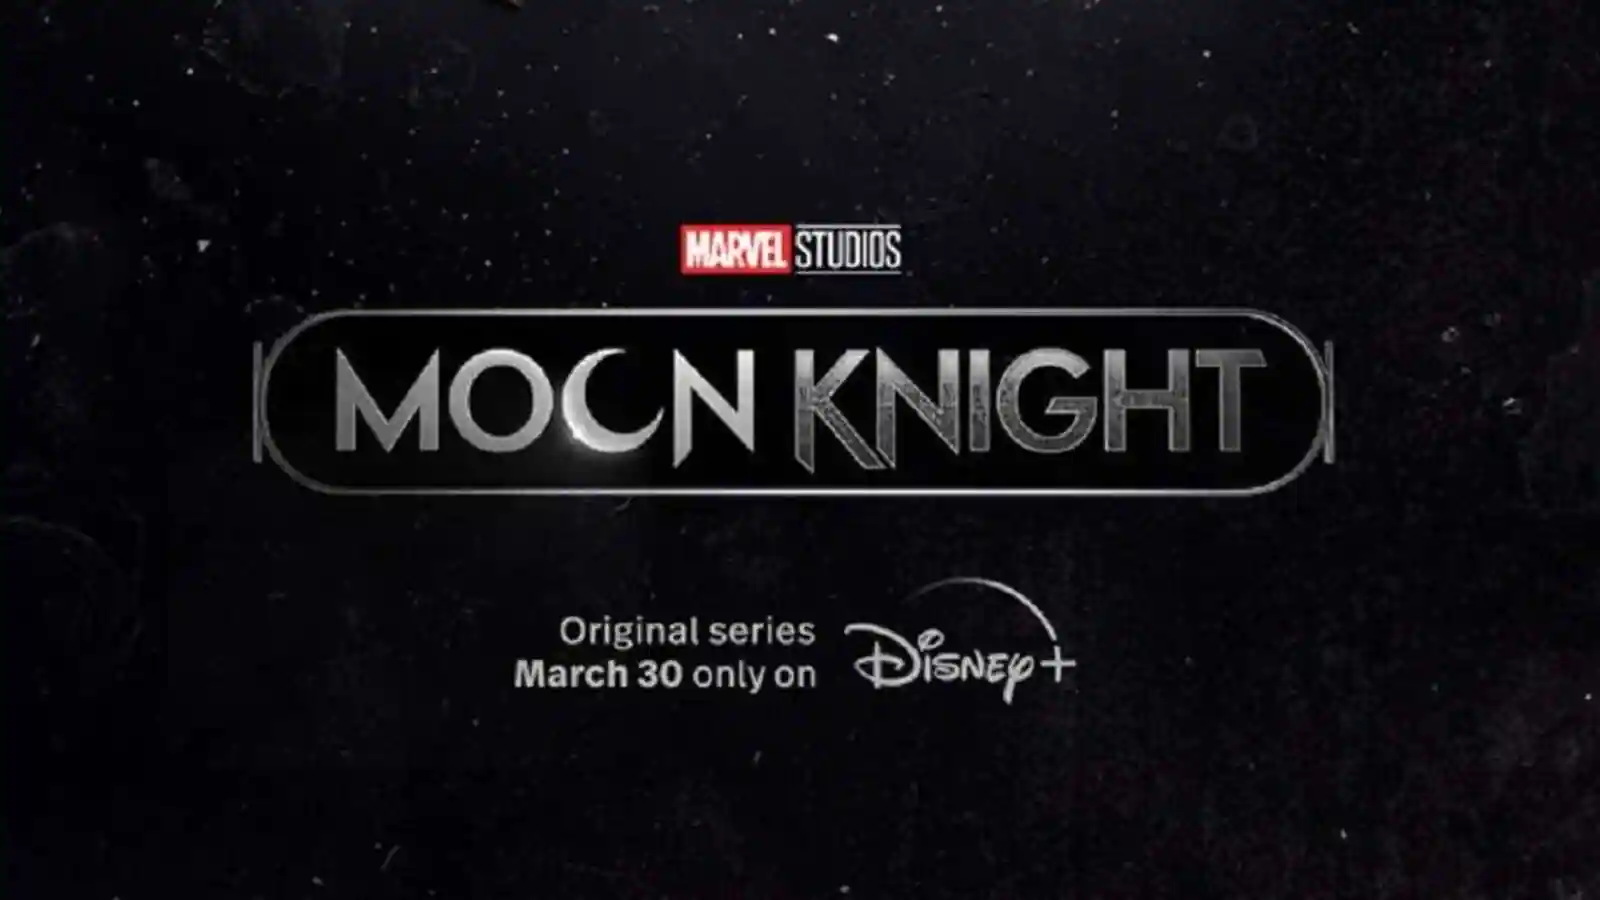 Moon Knight is streaming on Disney+